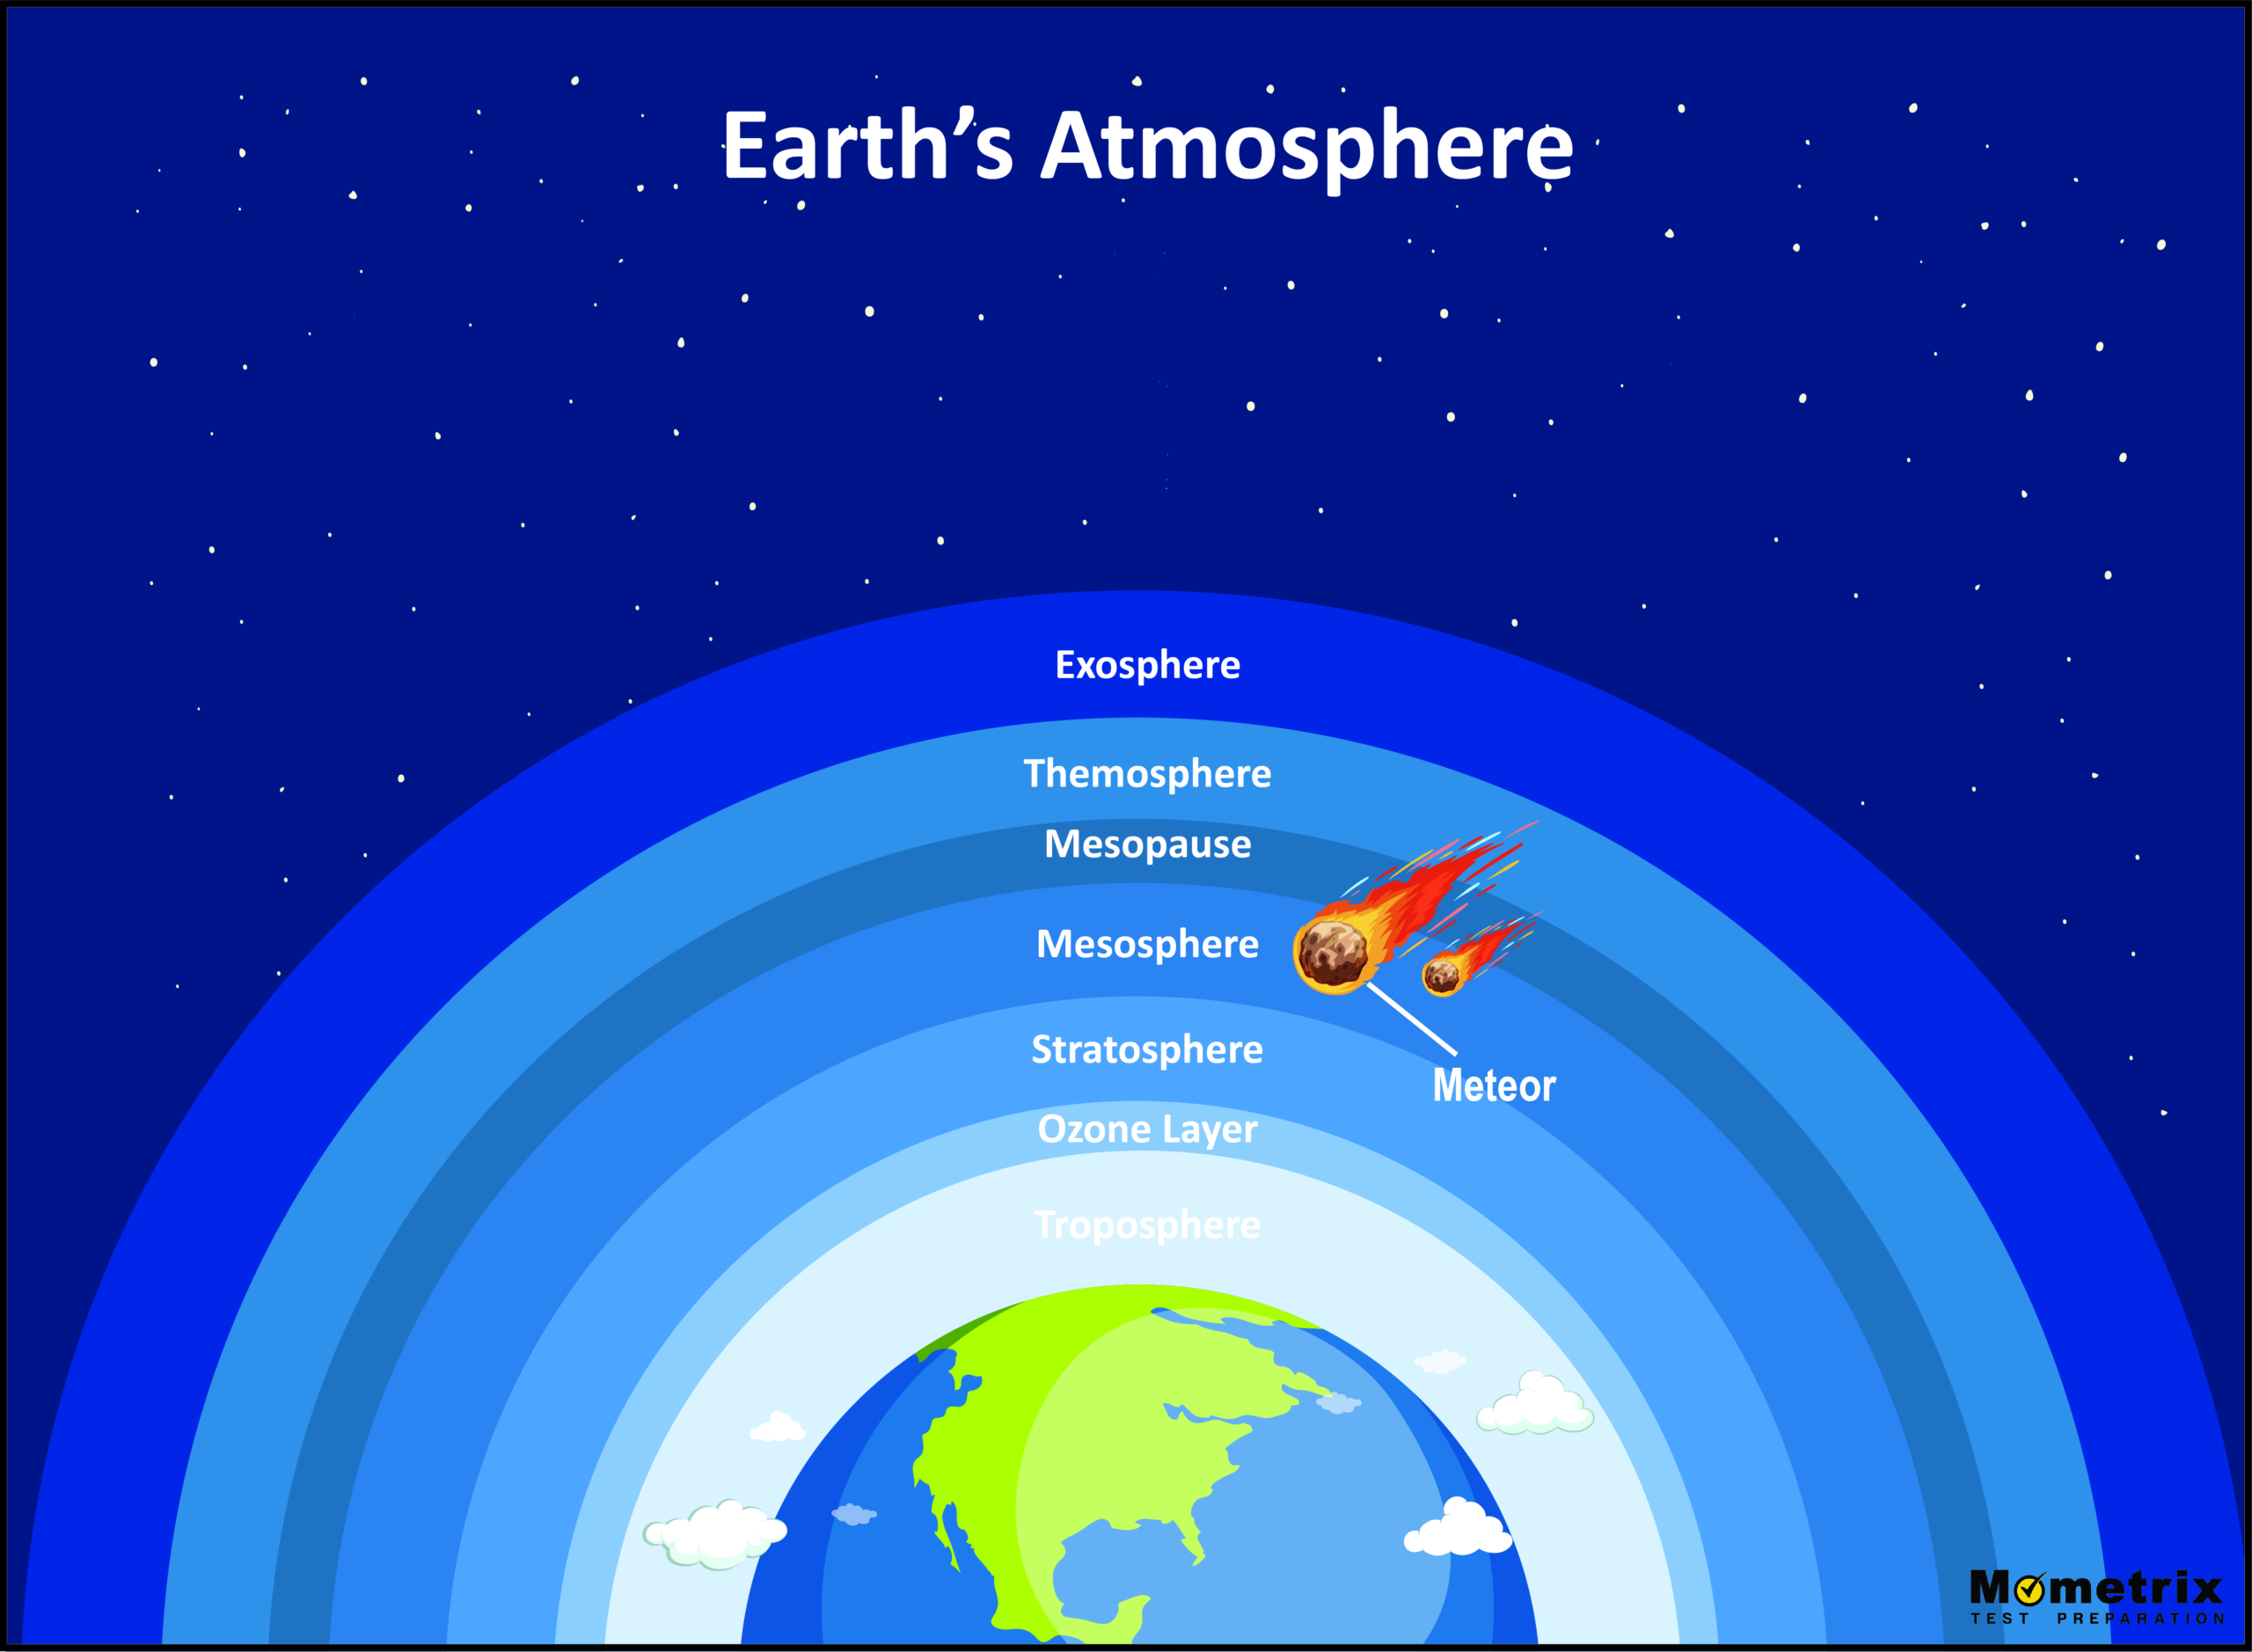 Earths-Atmosphere-with-logo-scaled.jpg